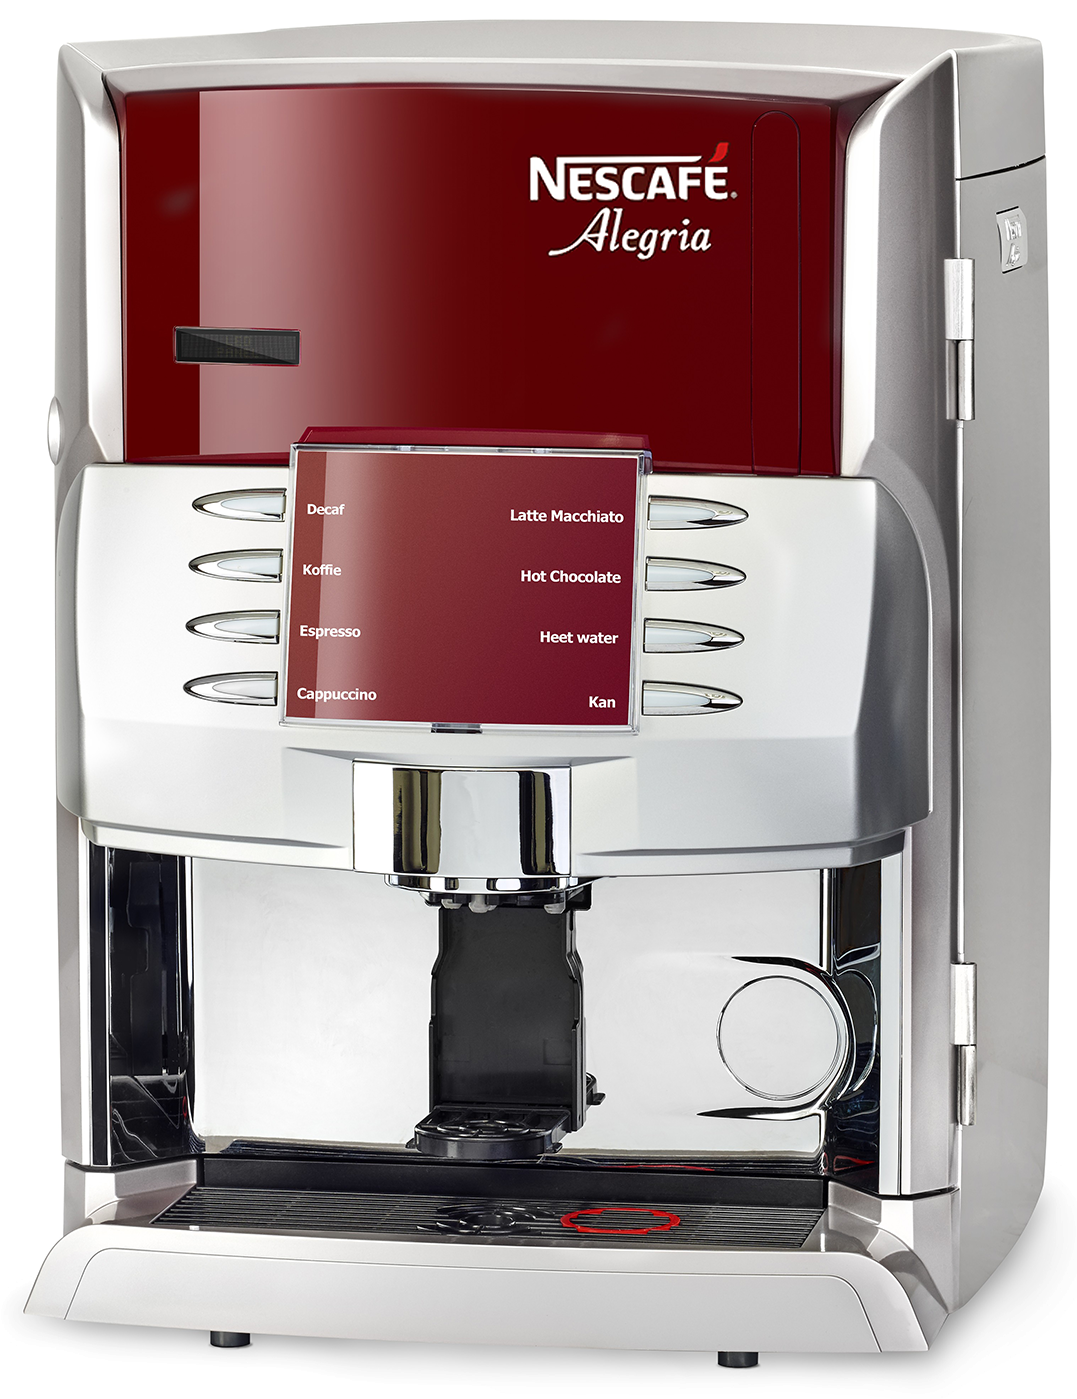 Coffee machine PNG, transparent png download